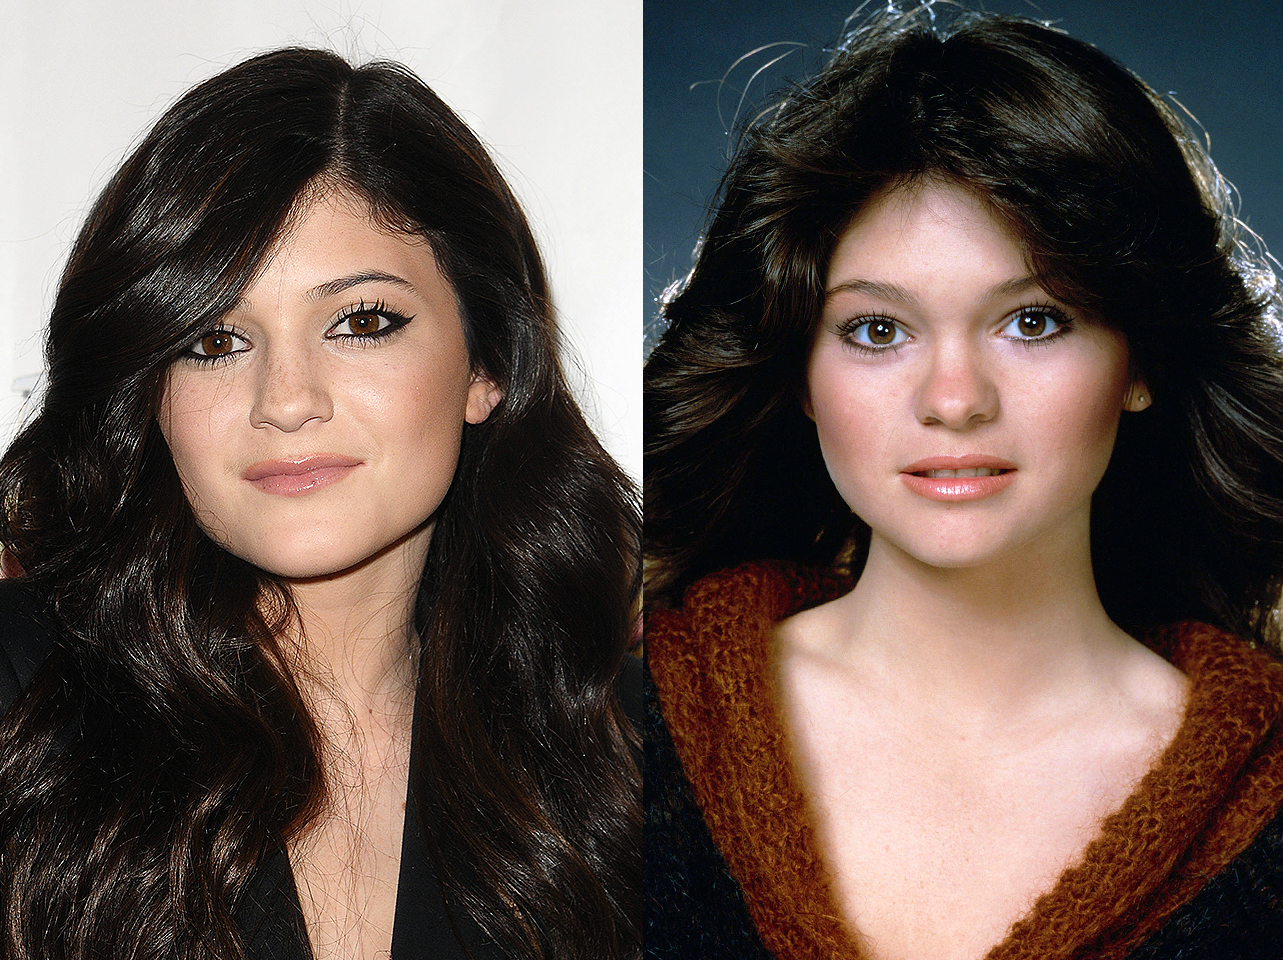 Kylie Jenner et Valerie Bertinelli | Source : Getty Images